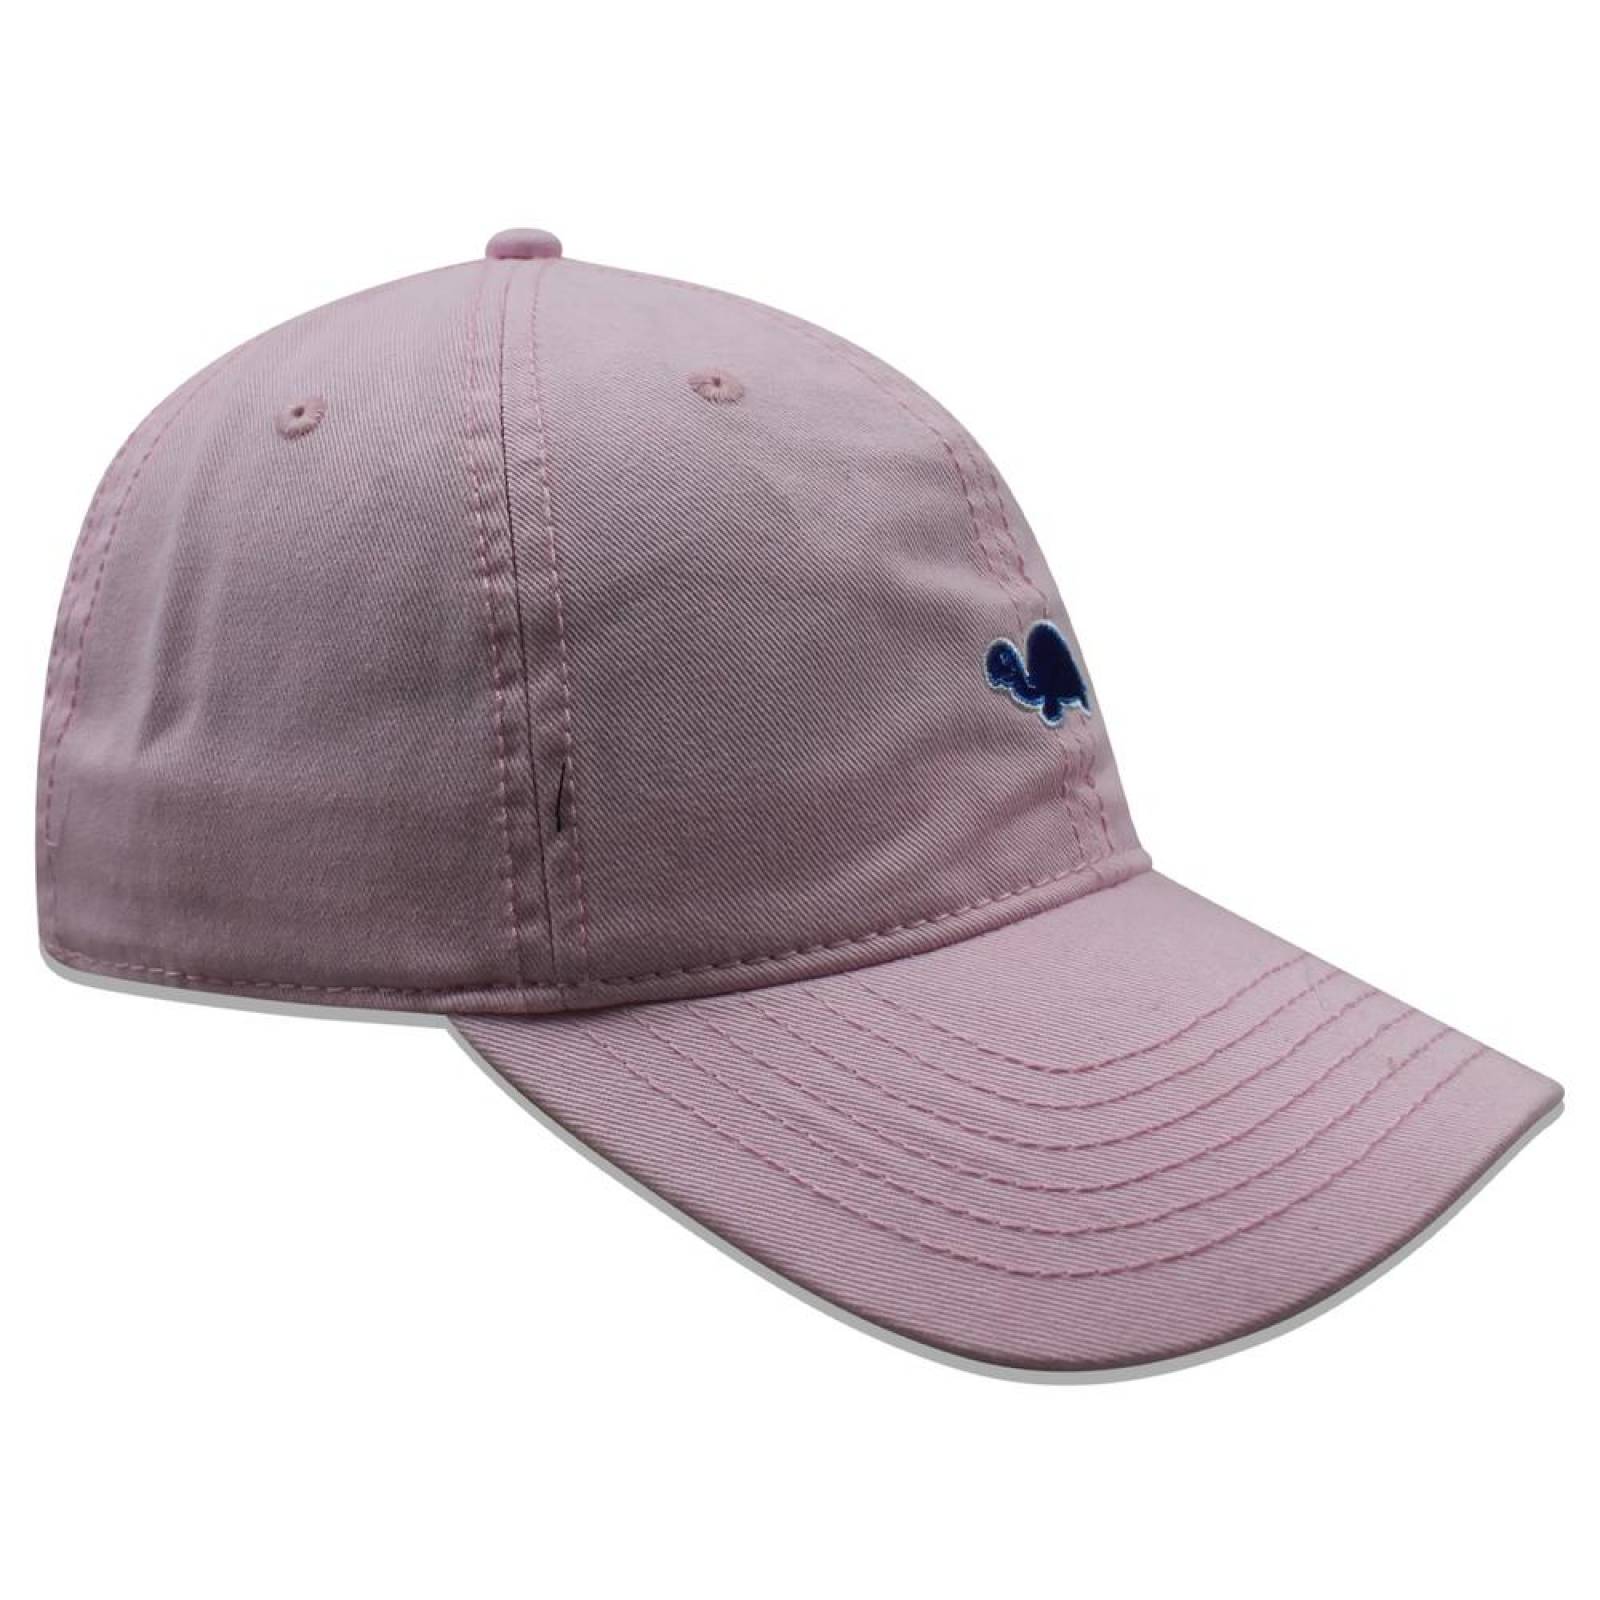 Gorra Concept One Coopers Cove Rosa 